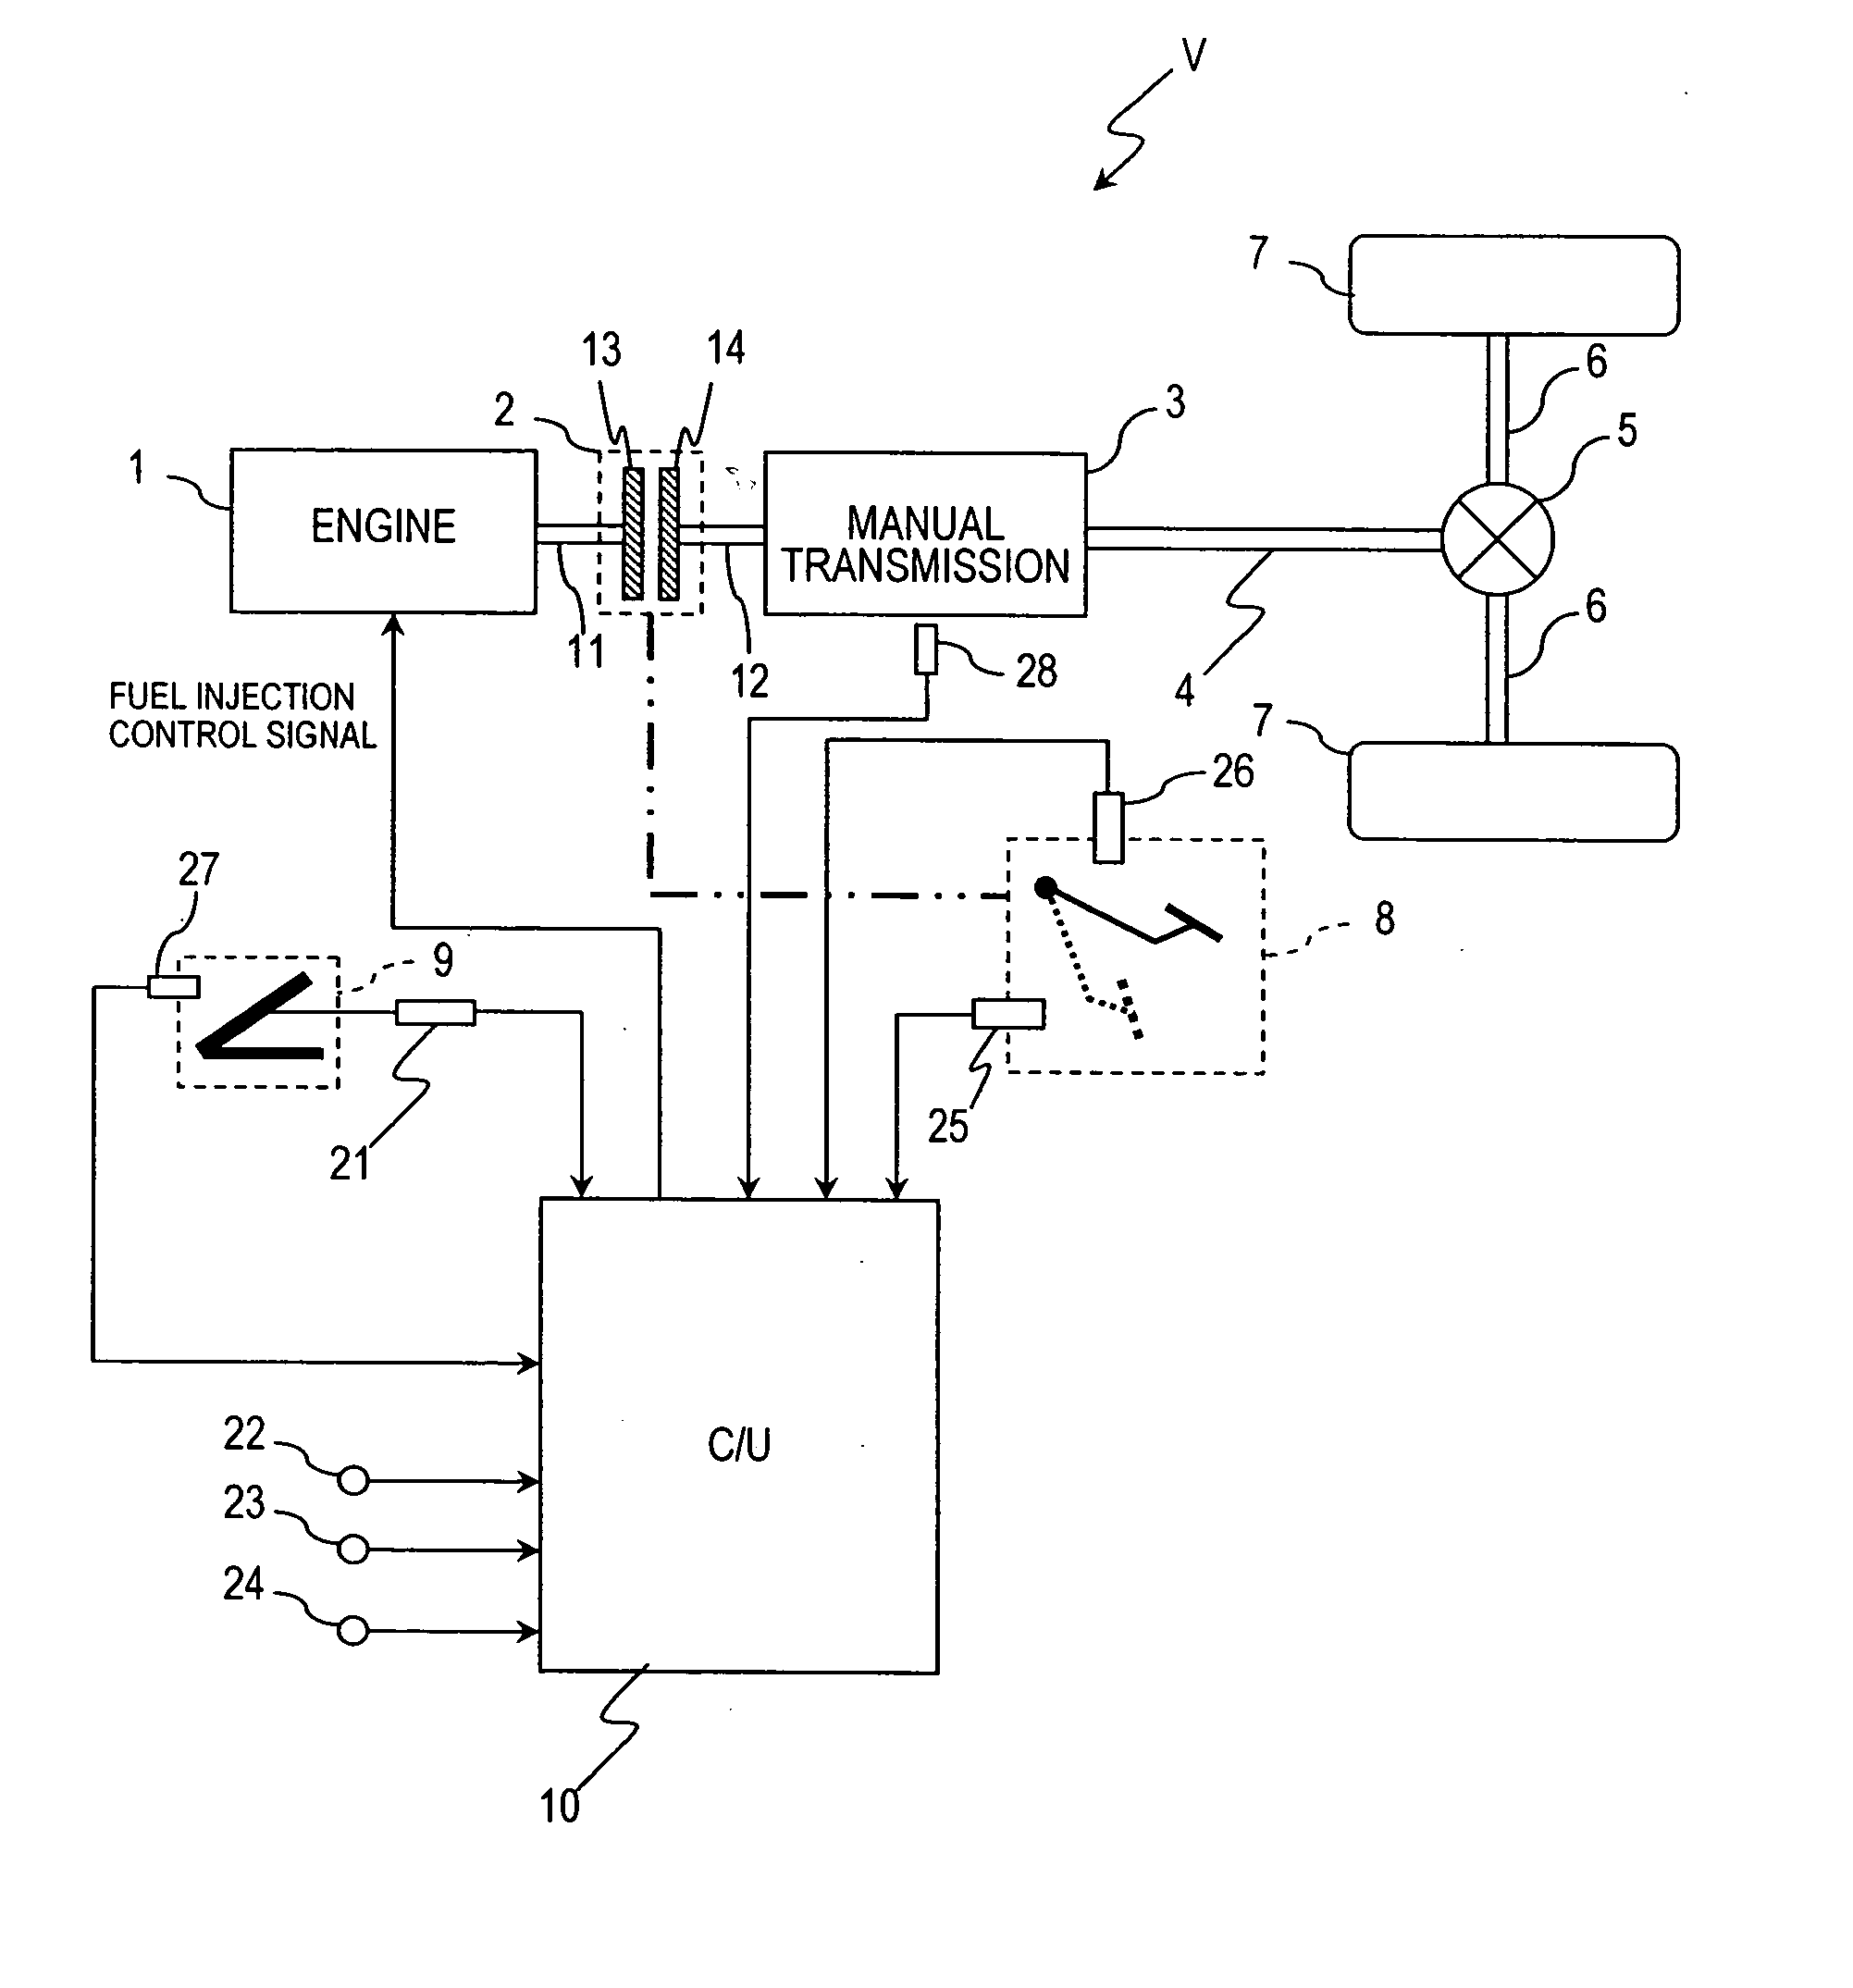 Engine fuel supply control device